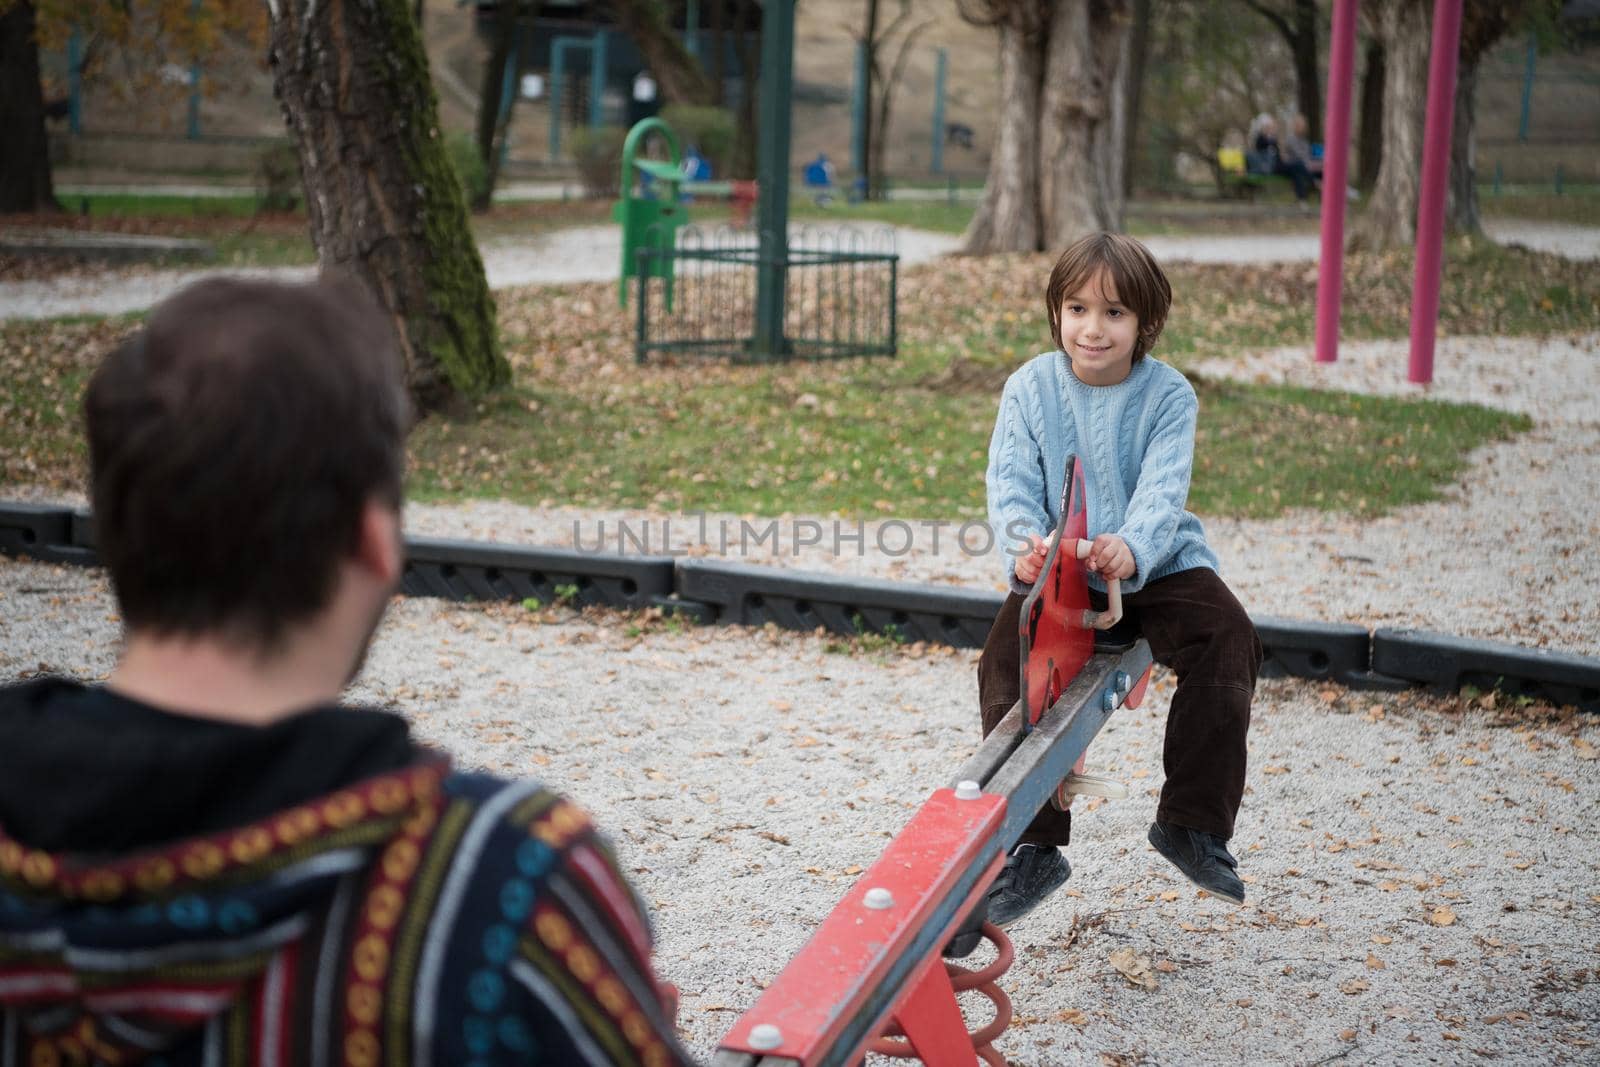 father and  child having fun together  in park playground happy family concept